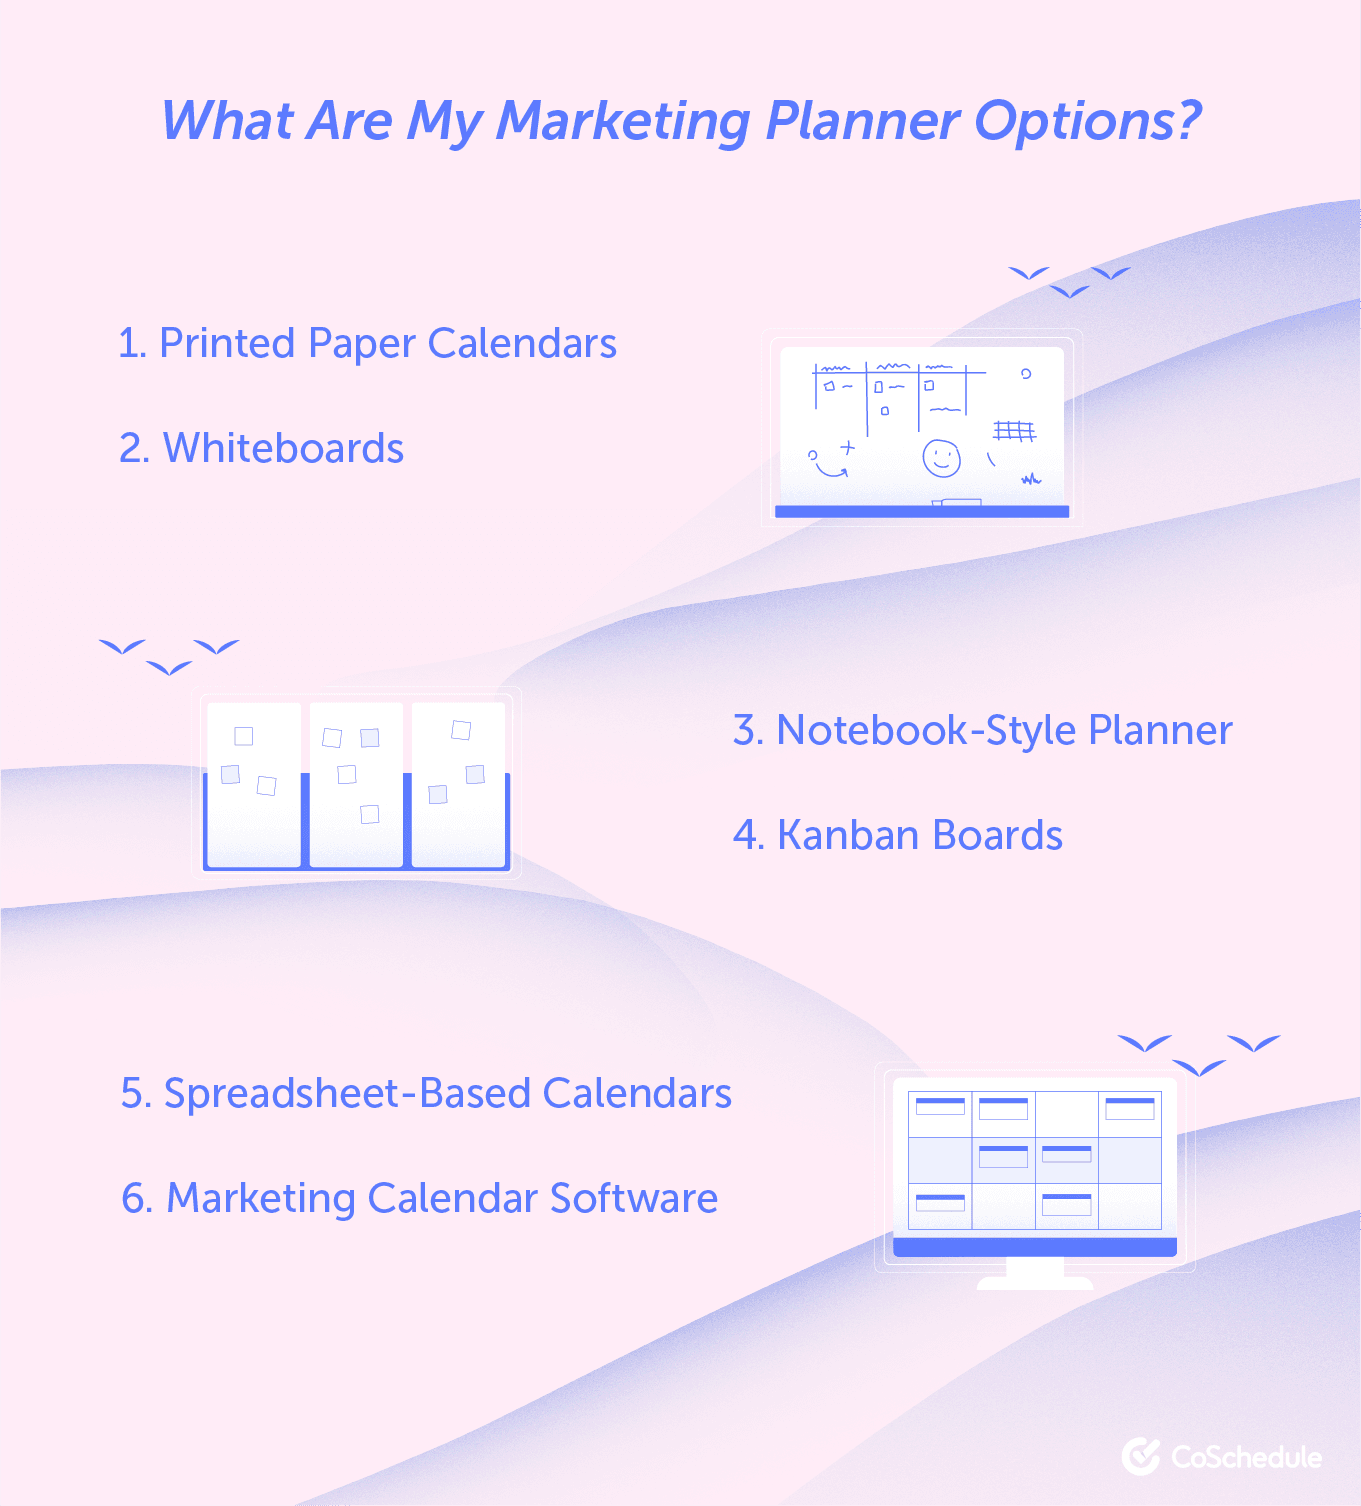 What you can use for marketing planning